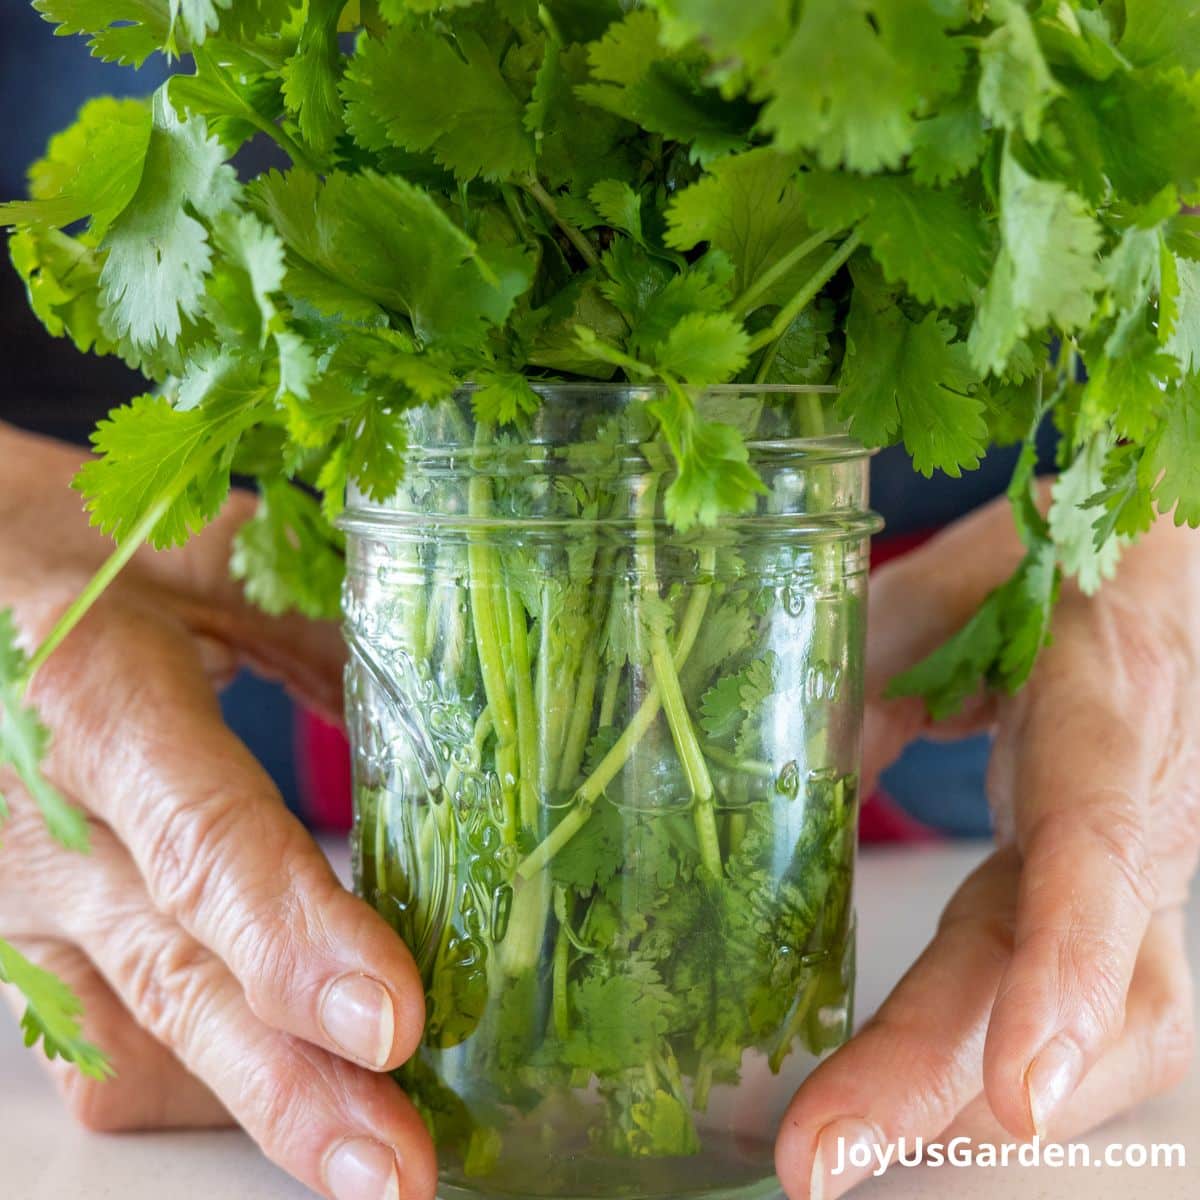 Parsley cuttings stored in water in a mason jar, woman holding the jar in kitchen.